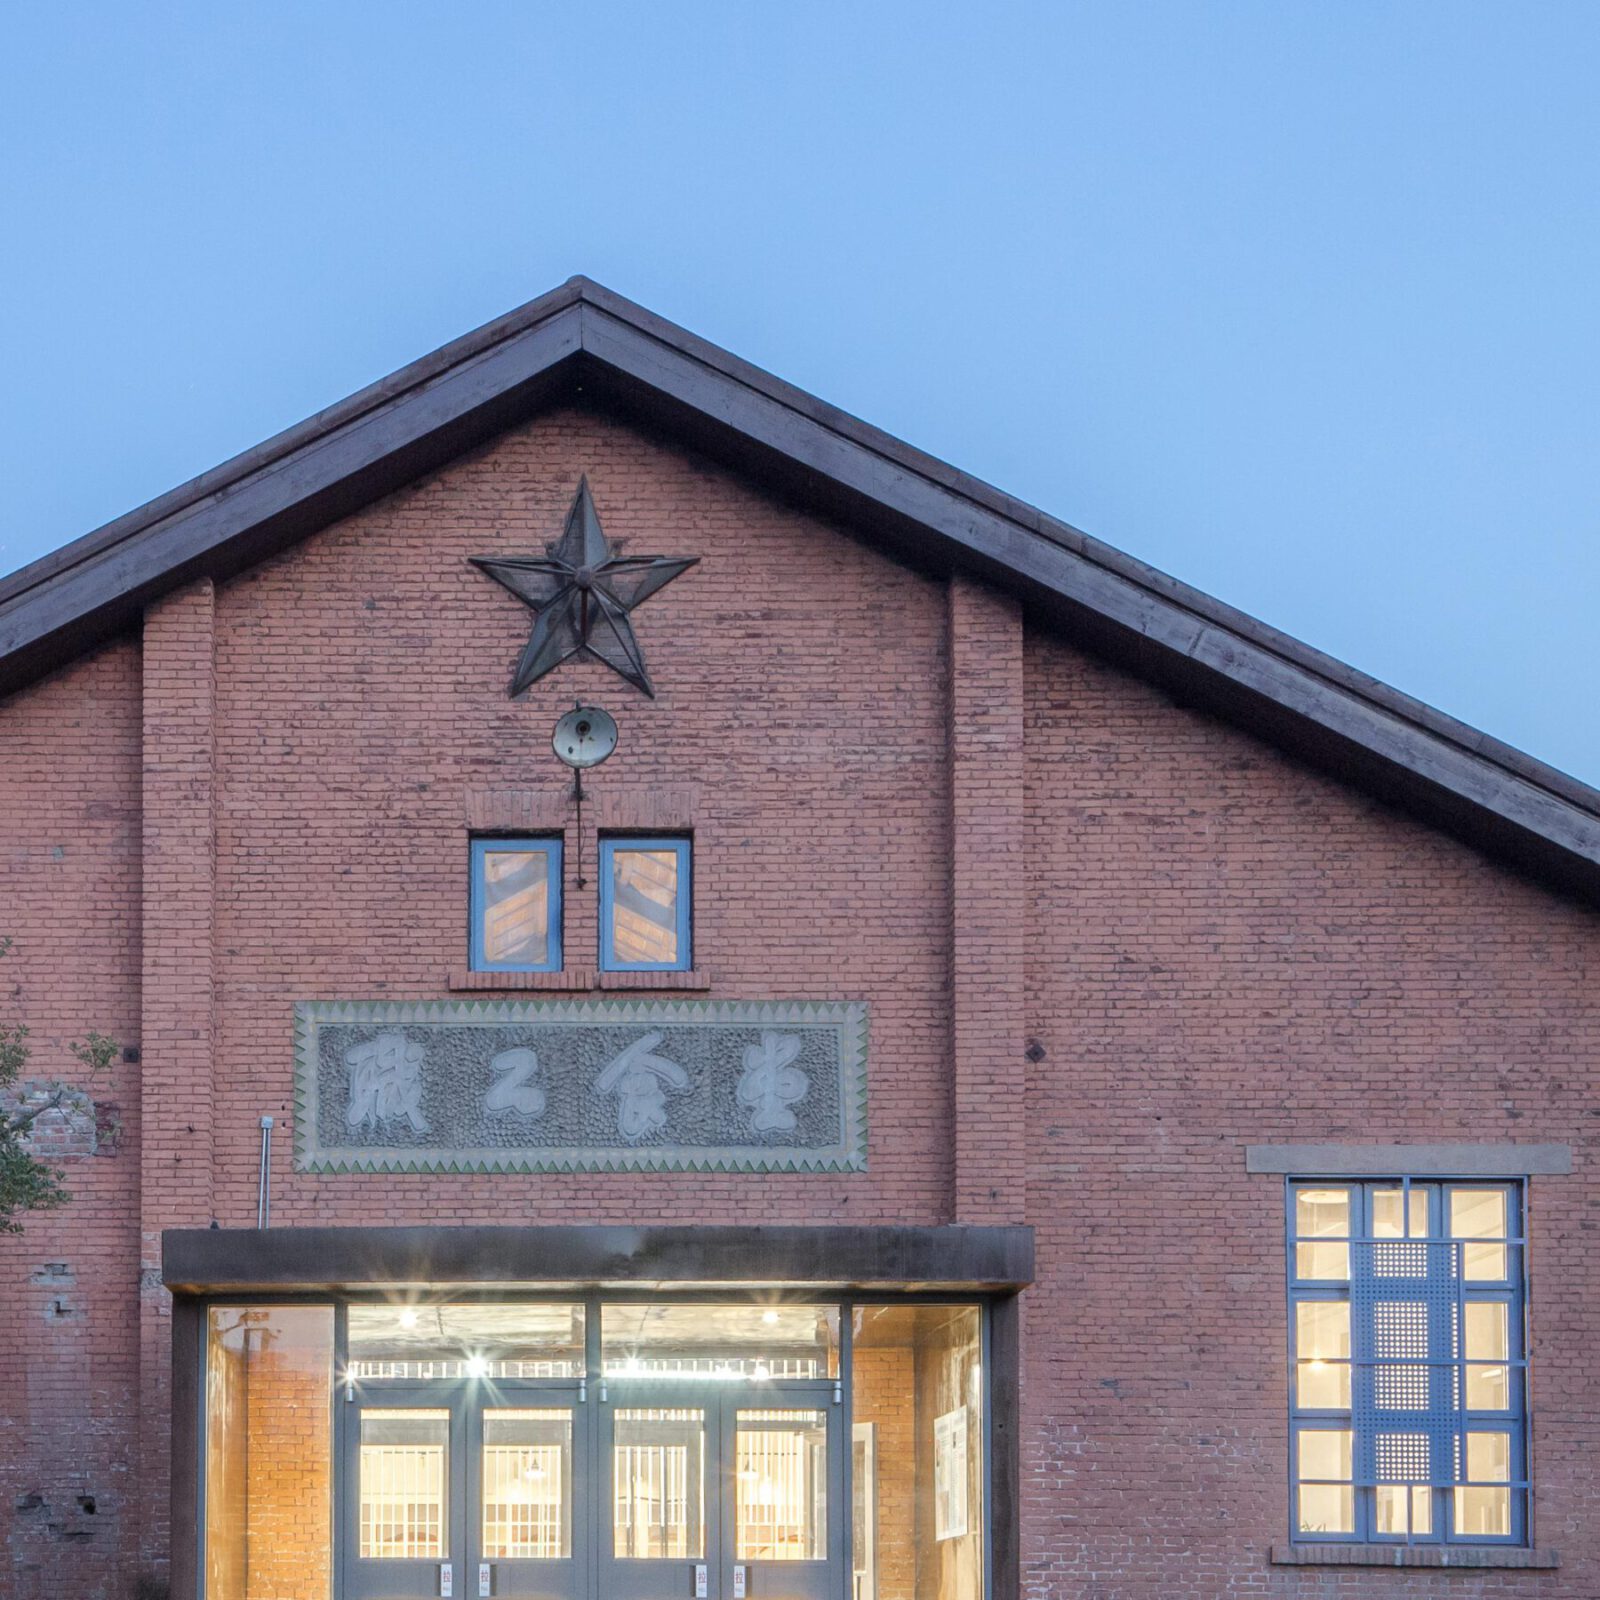 Archisearch Architect Aurelien Chen reinterprets China’s 'Red Era' in the refurbishment of 'Former miner’s canteen' in Shijiazhuang, China